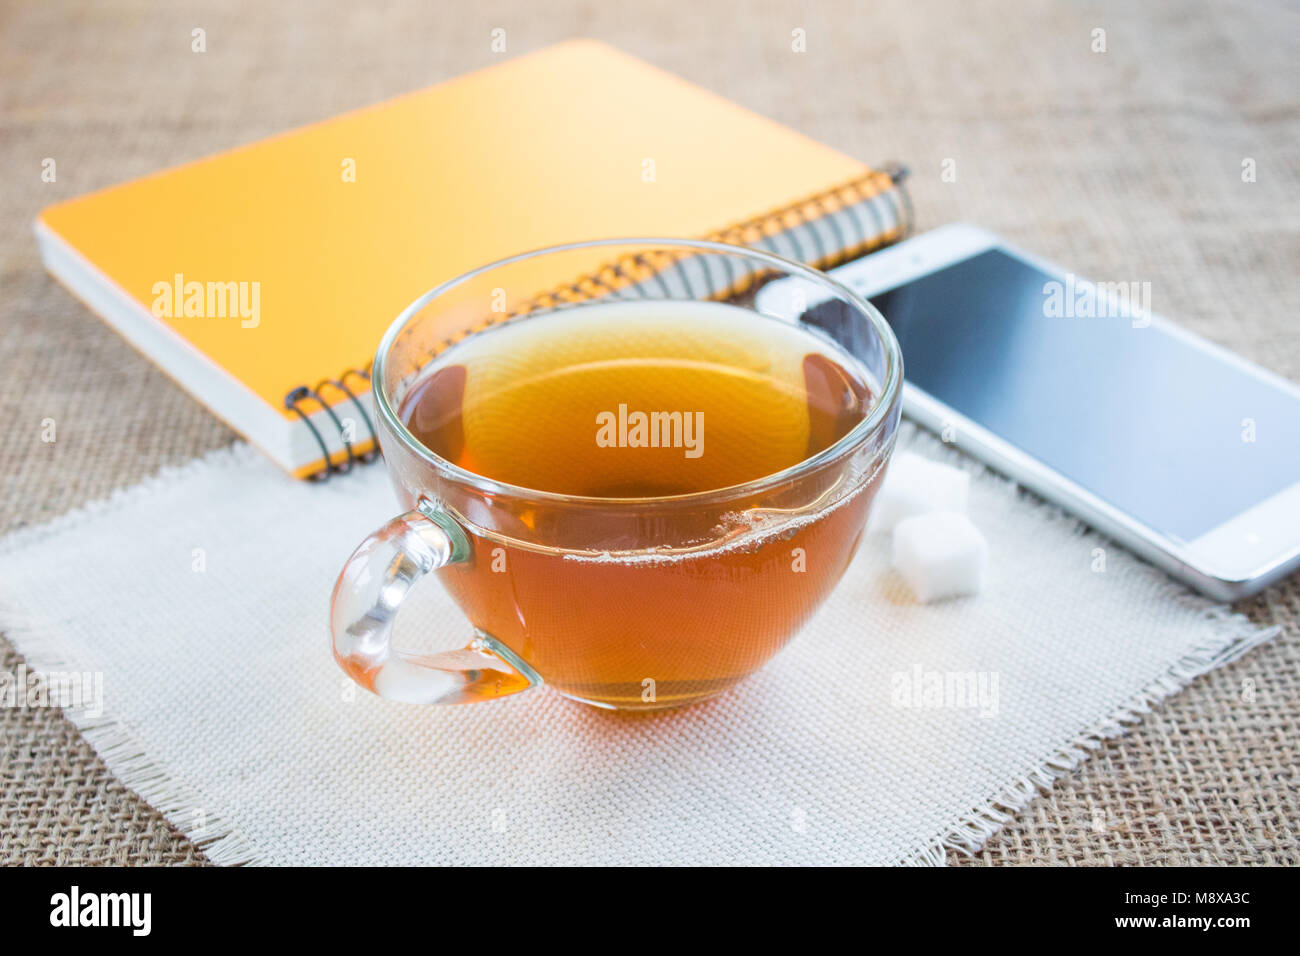 Morning cup of tea. Near the cup is a white smartphone. Notepad to write plans for the day. Stock Photo